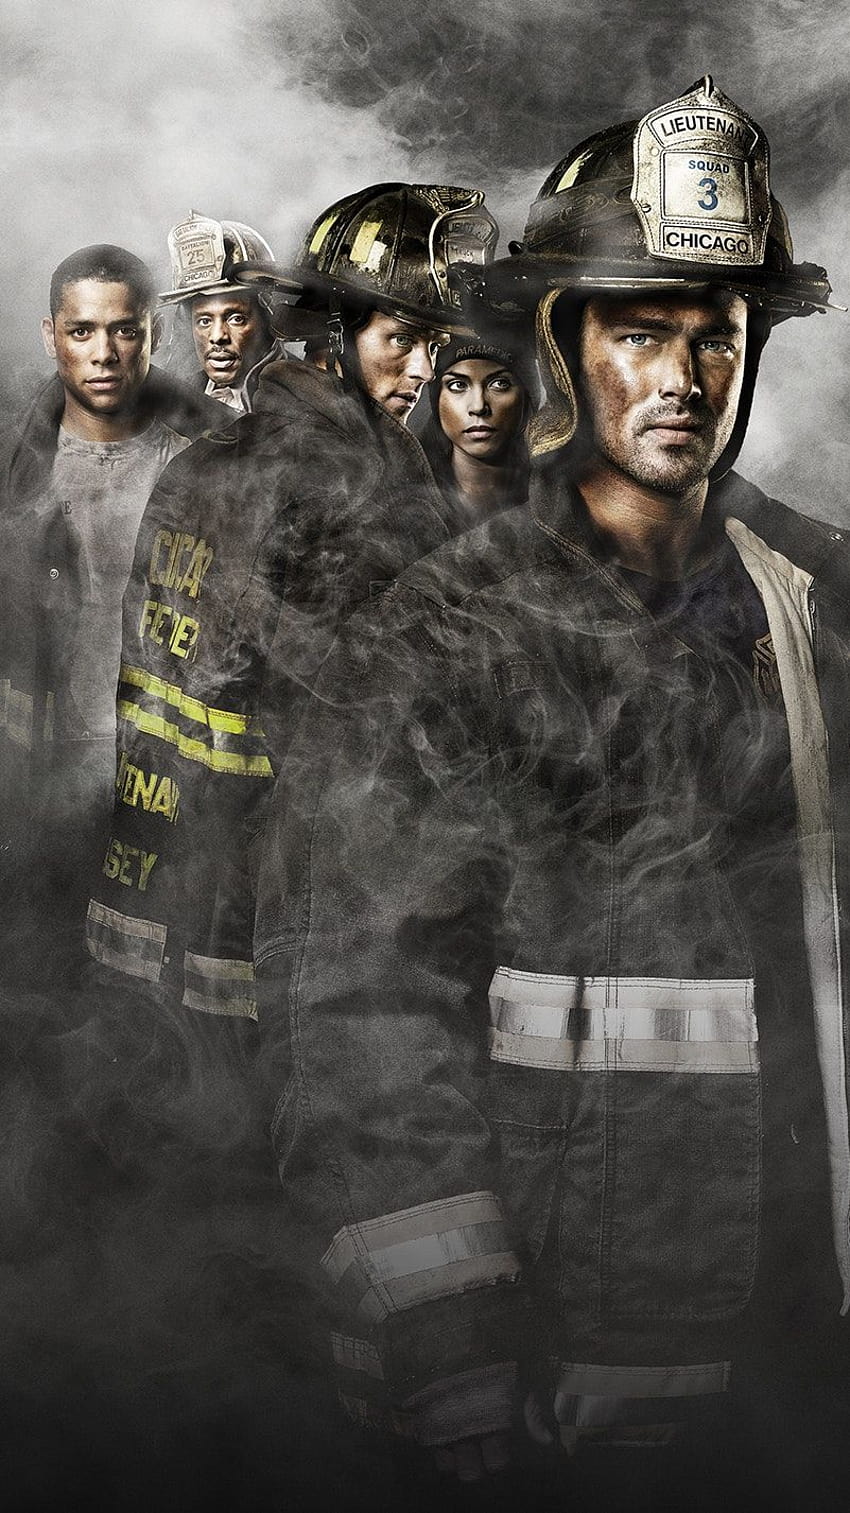 Chicago Fire Phone, chicago med HD phone wallpaper